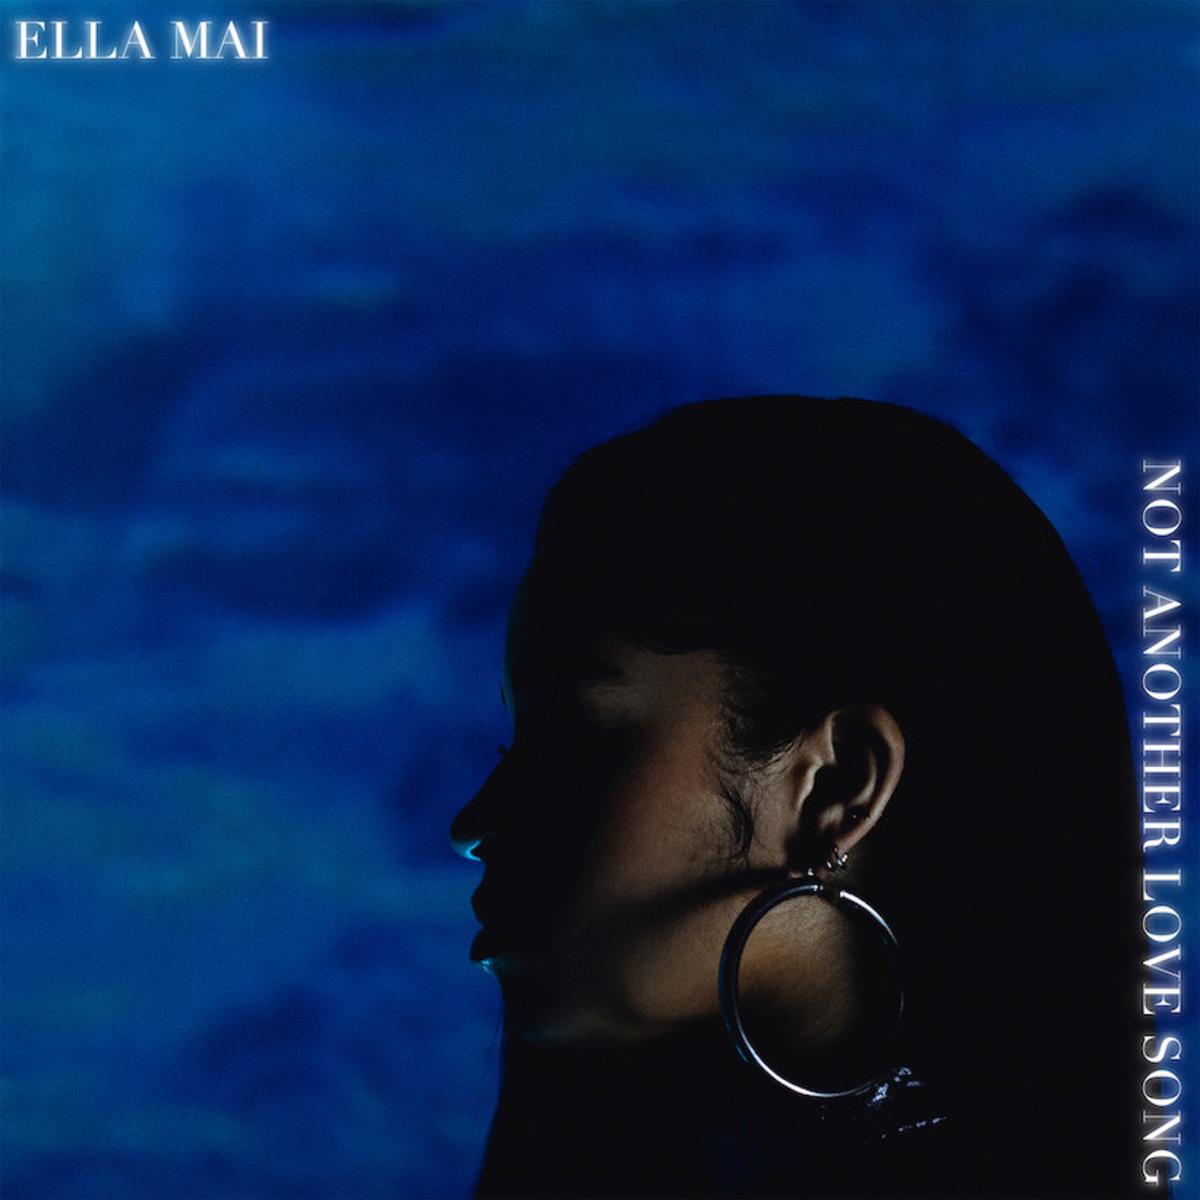 Ella Mai Returns With “Not Another Love Song”